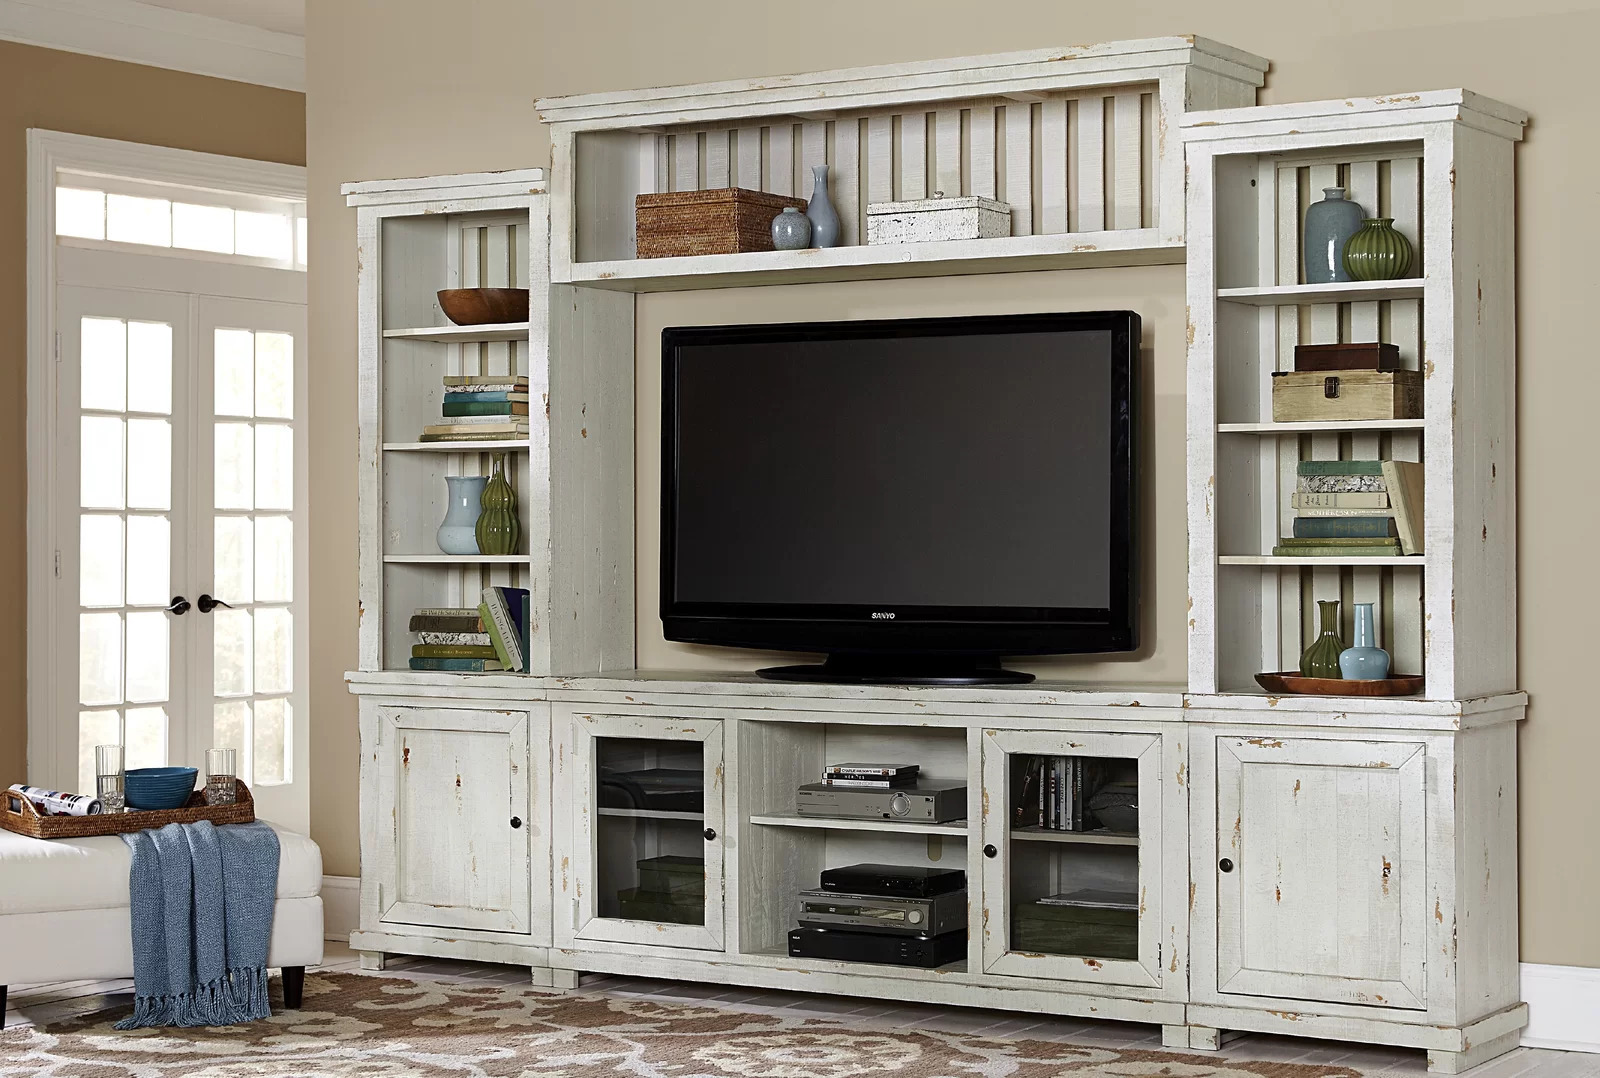 Distressed Country Style Entertainment Center